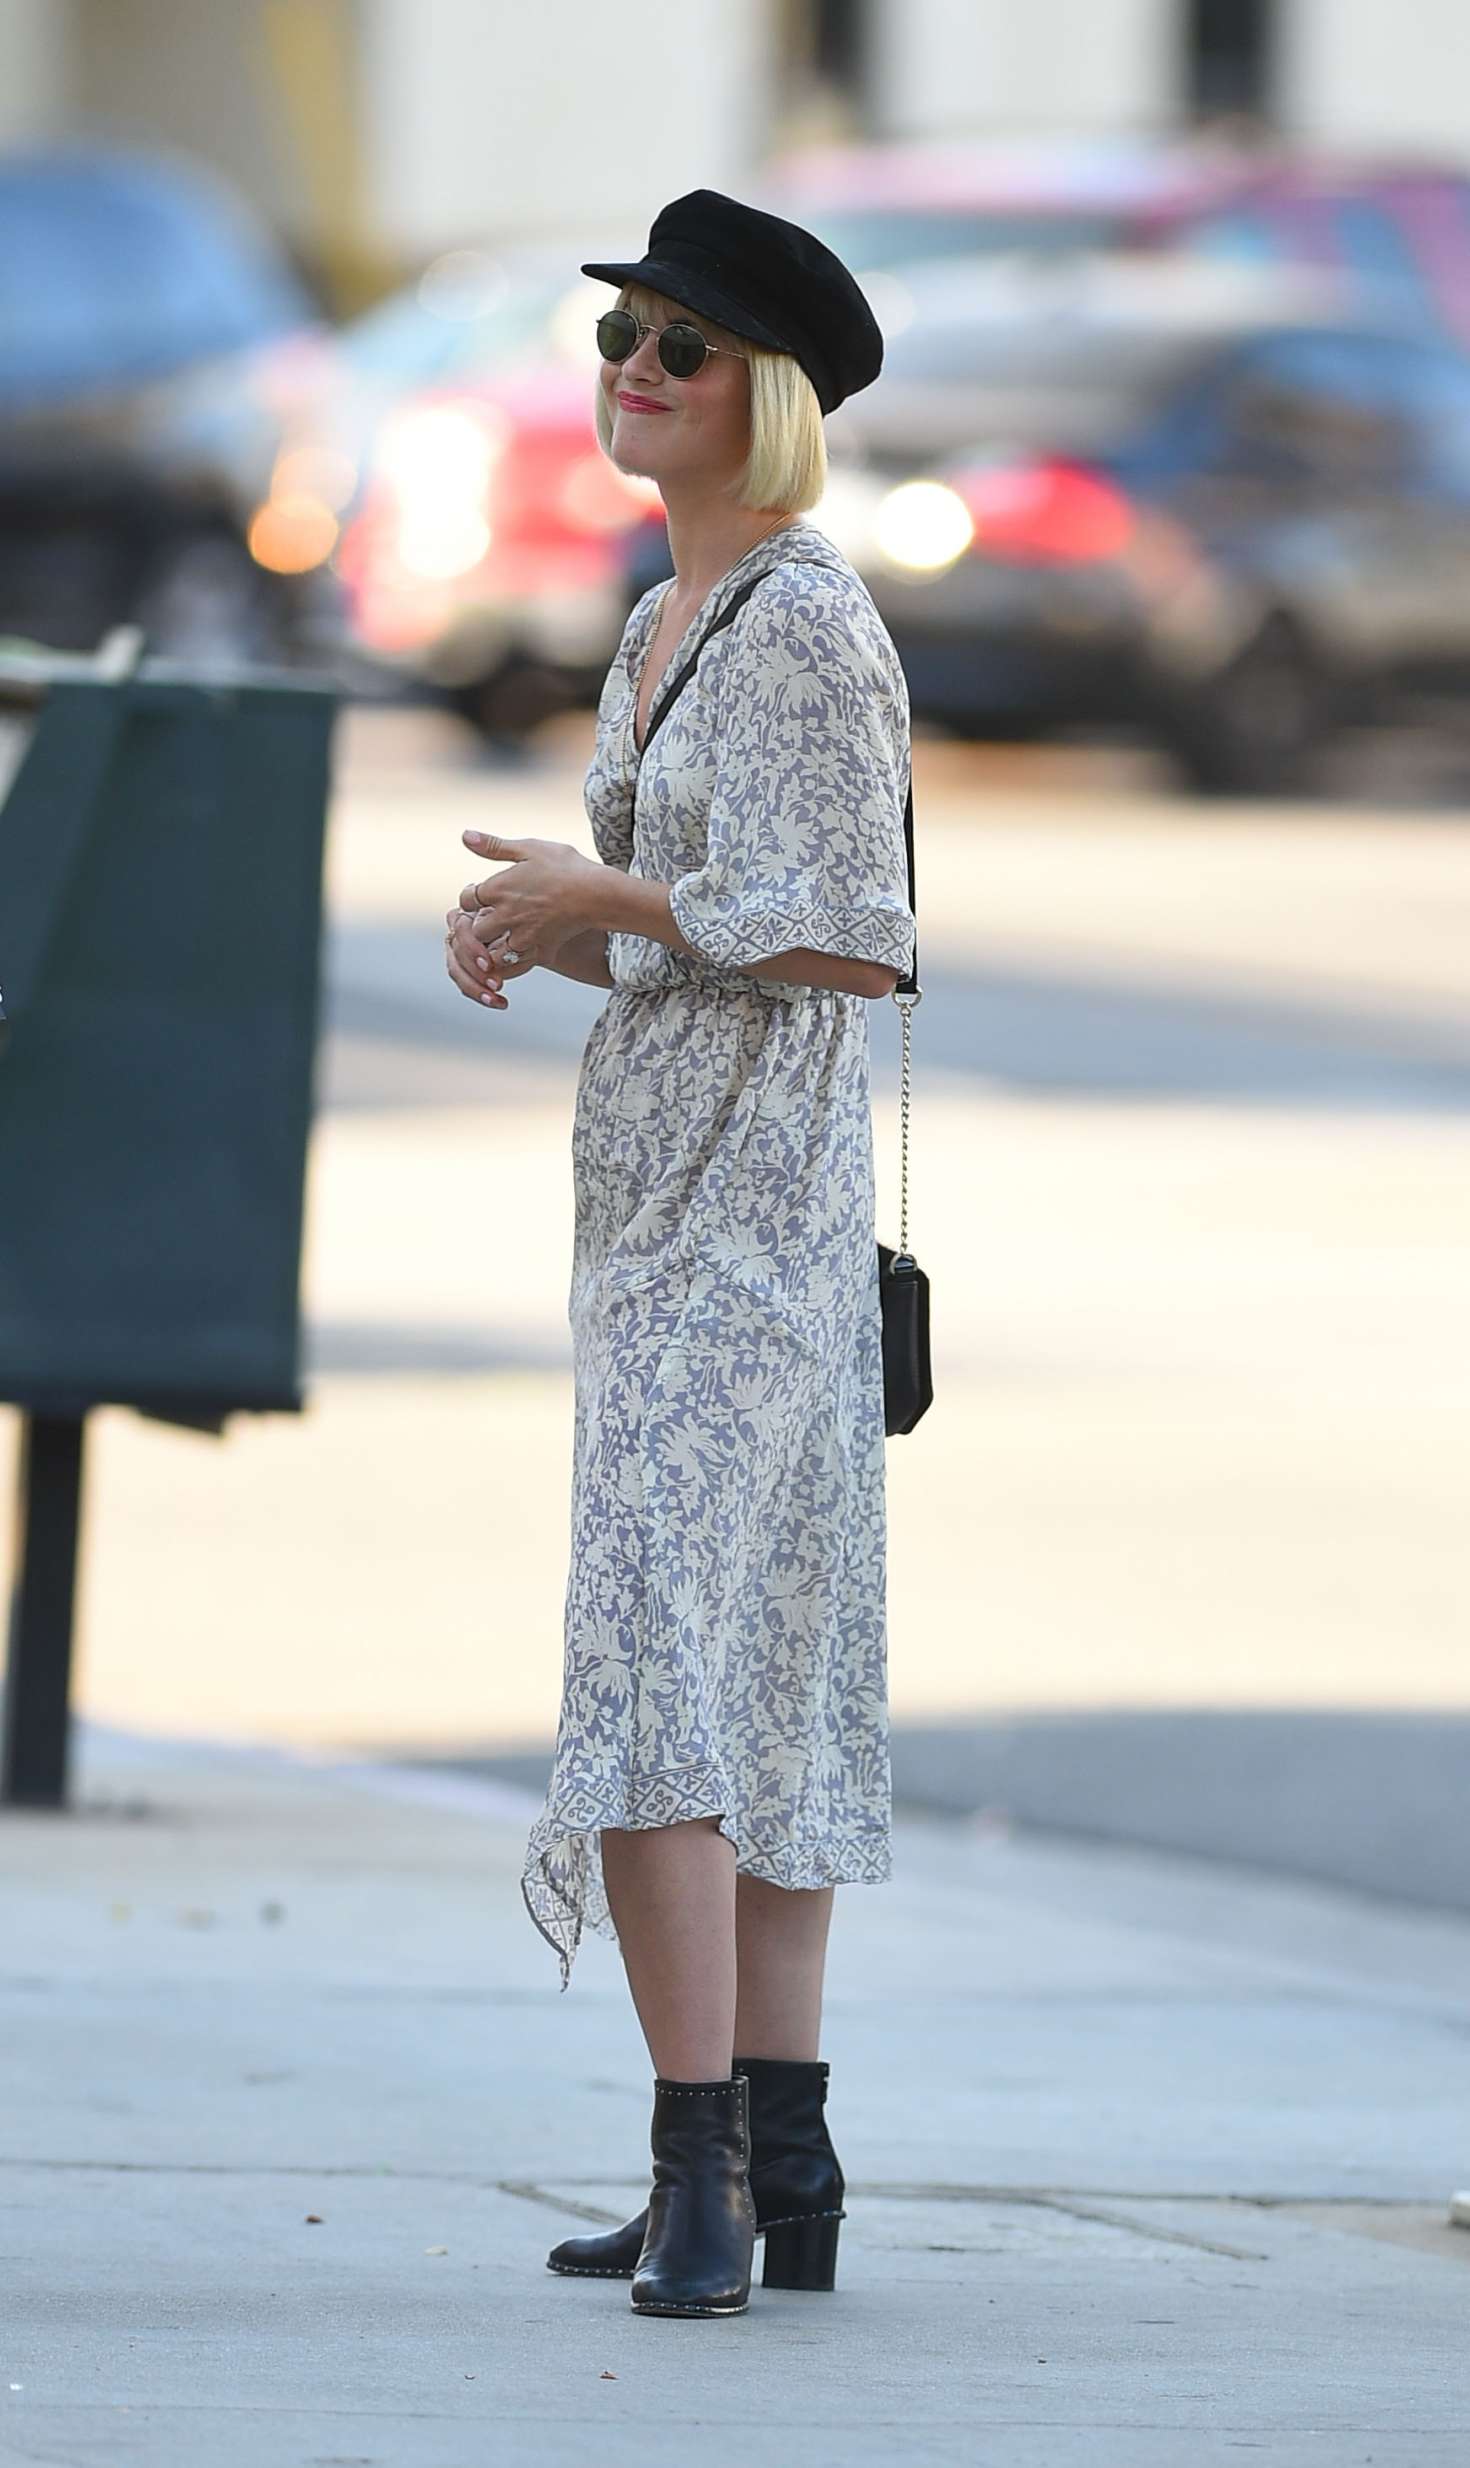 Julianne Hough in Summer Dress â€“ Out and about in Los Angeles